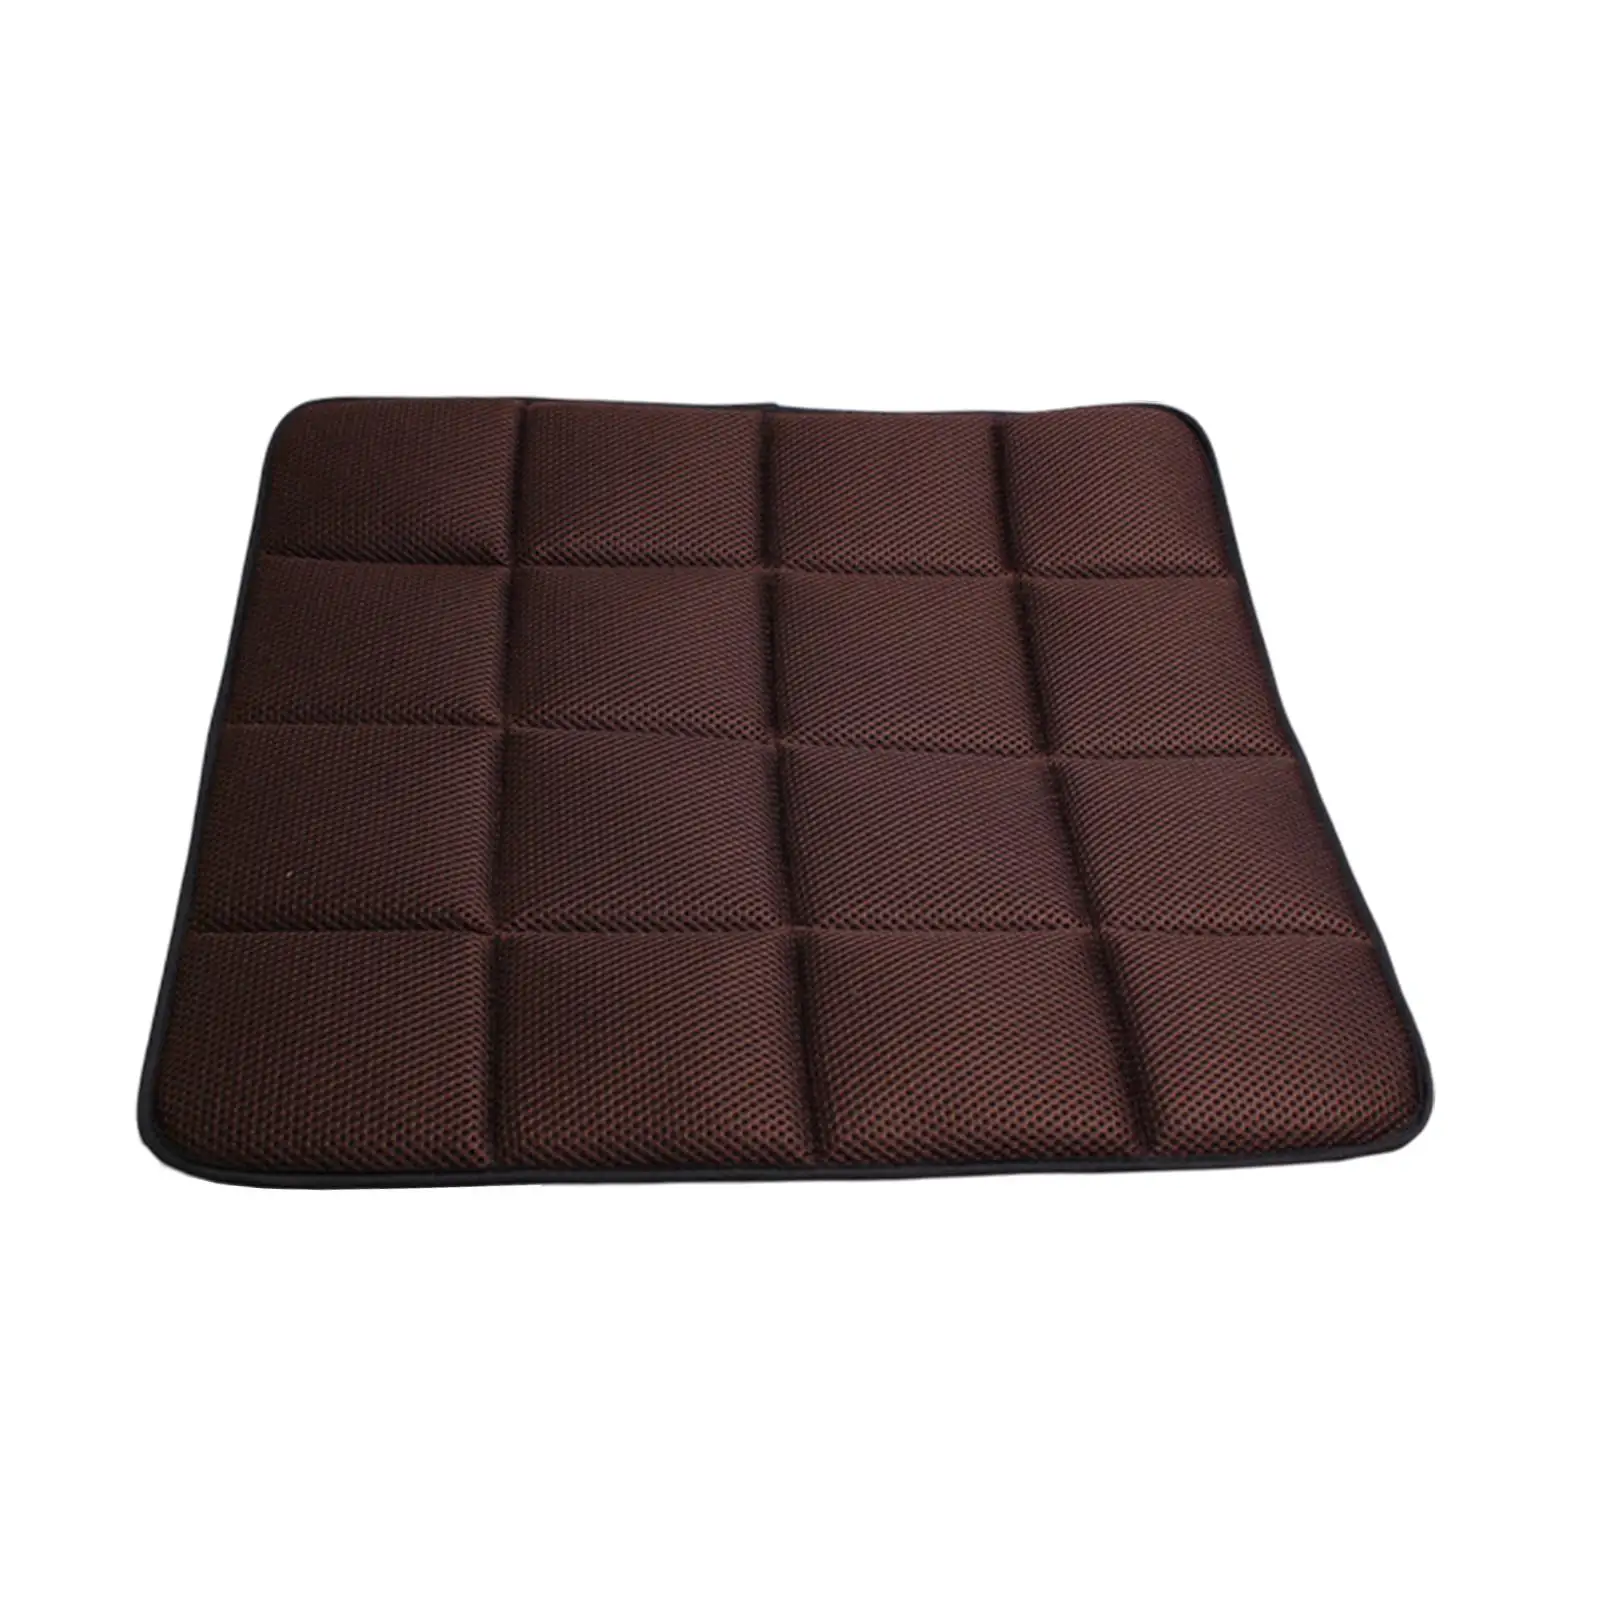 Car seat pad, car chair cover, bamboo charcoal, universal, breathable,